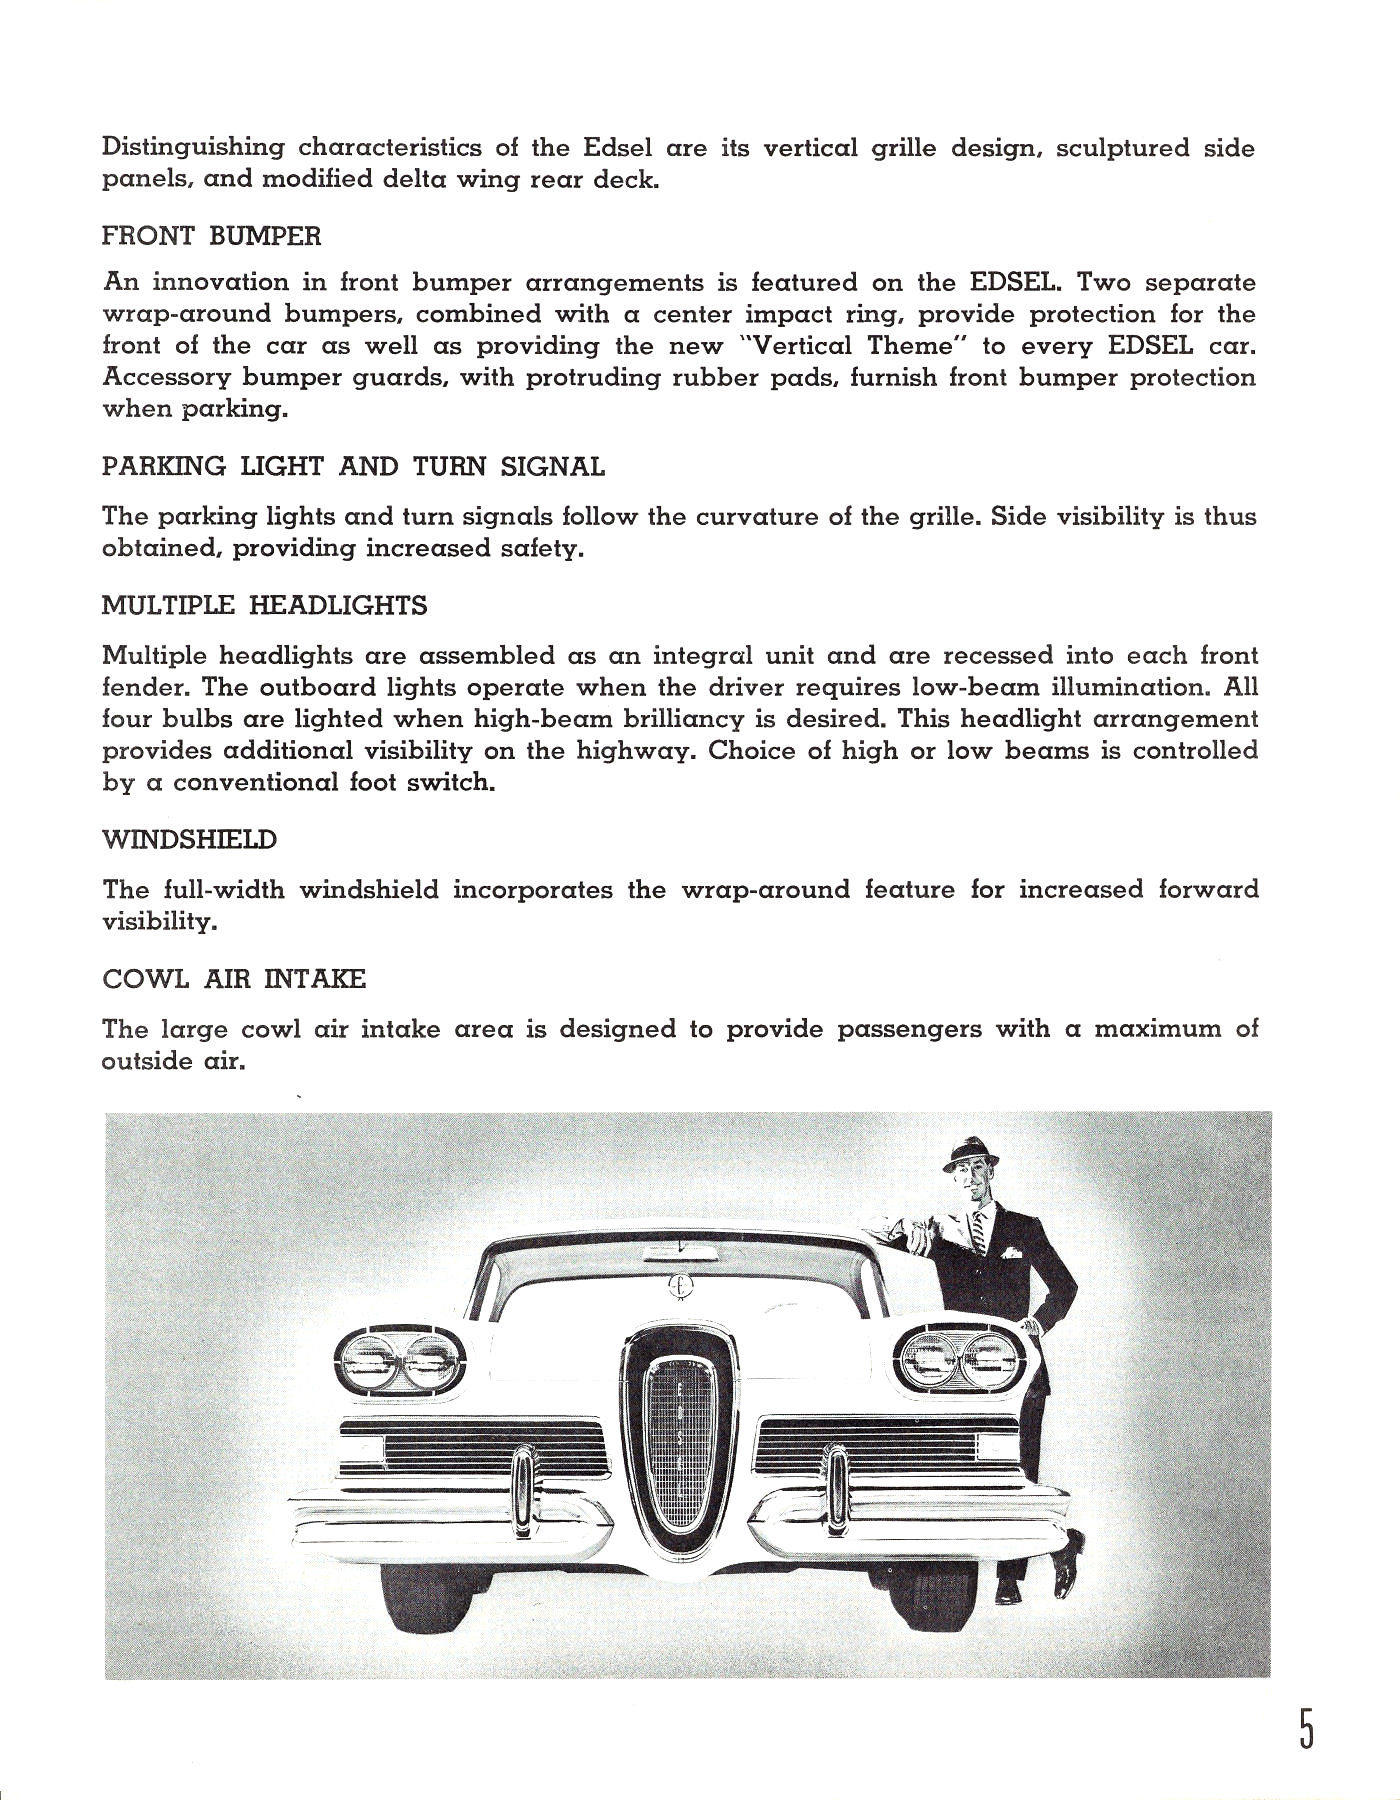 1958 Edsel Features-05